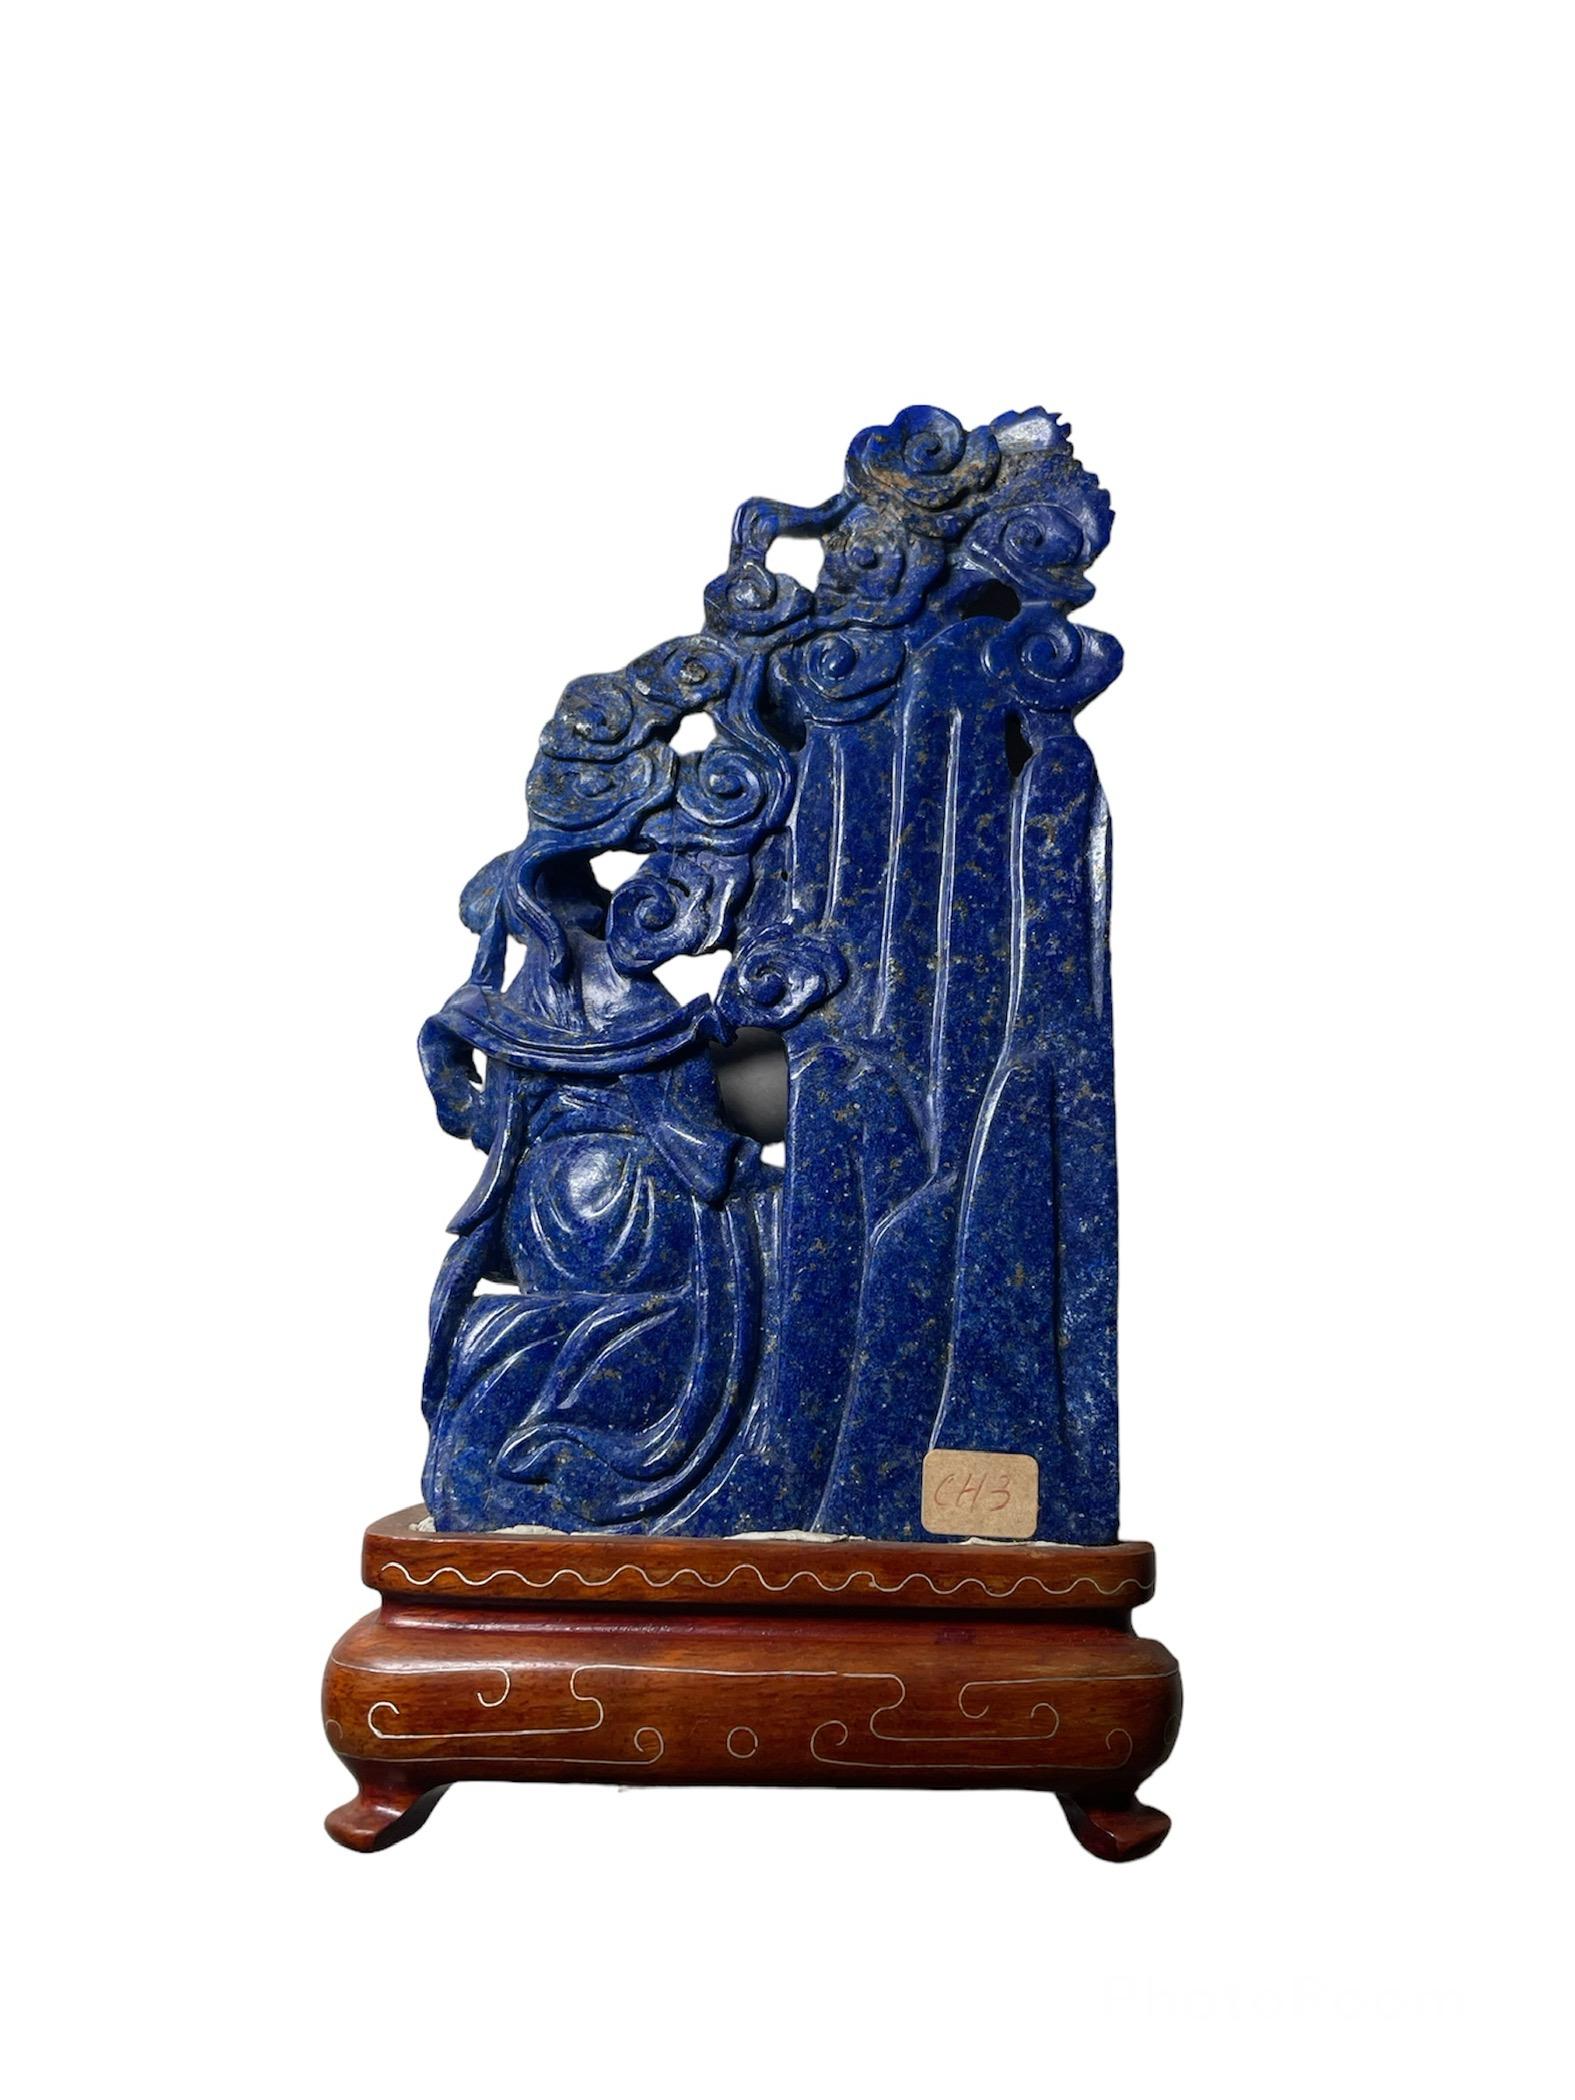 Chinese Export Chinese Hand Carved Lapis Lazuli Sculptures of the Guan Yin and Phoenix Bird For Sale